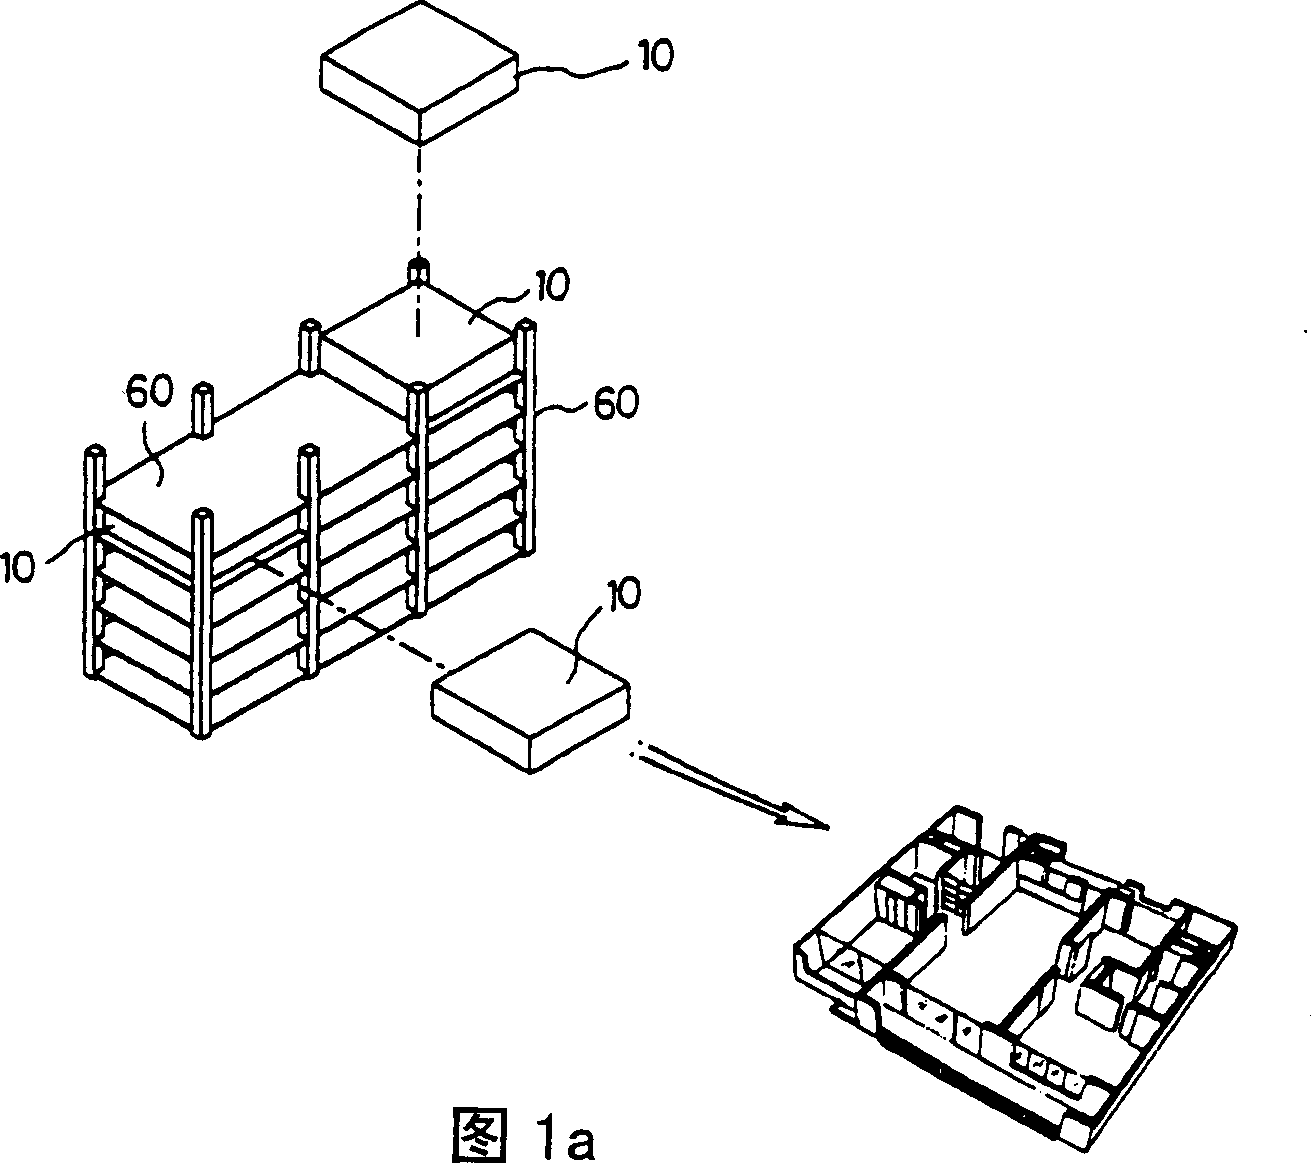 Design and construction method for pre-fabricated high rise building attaching for environments and village community